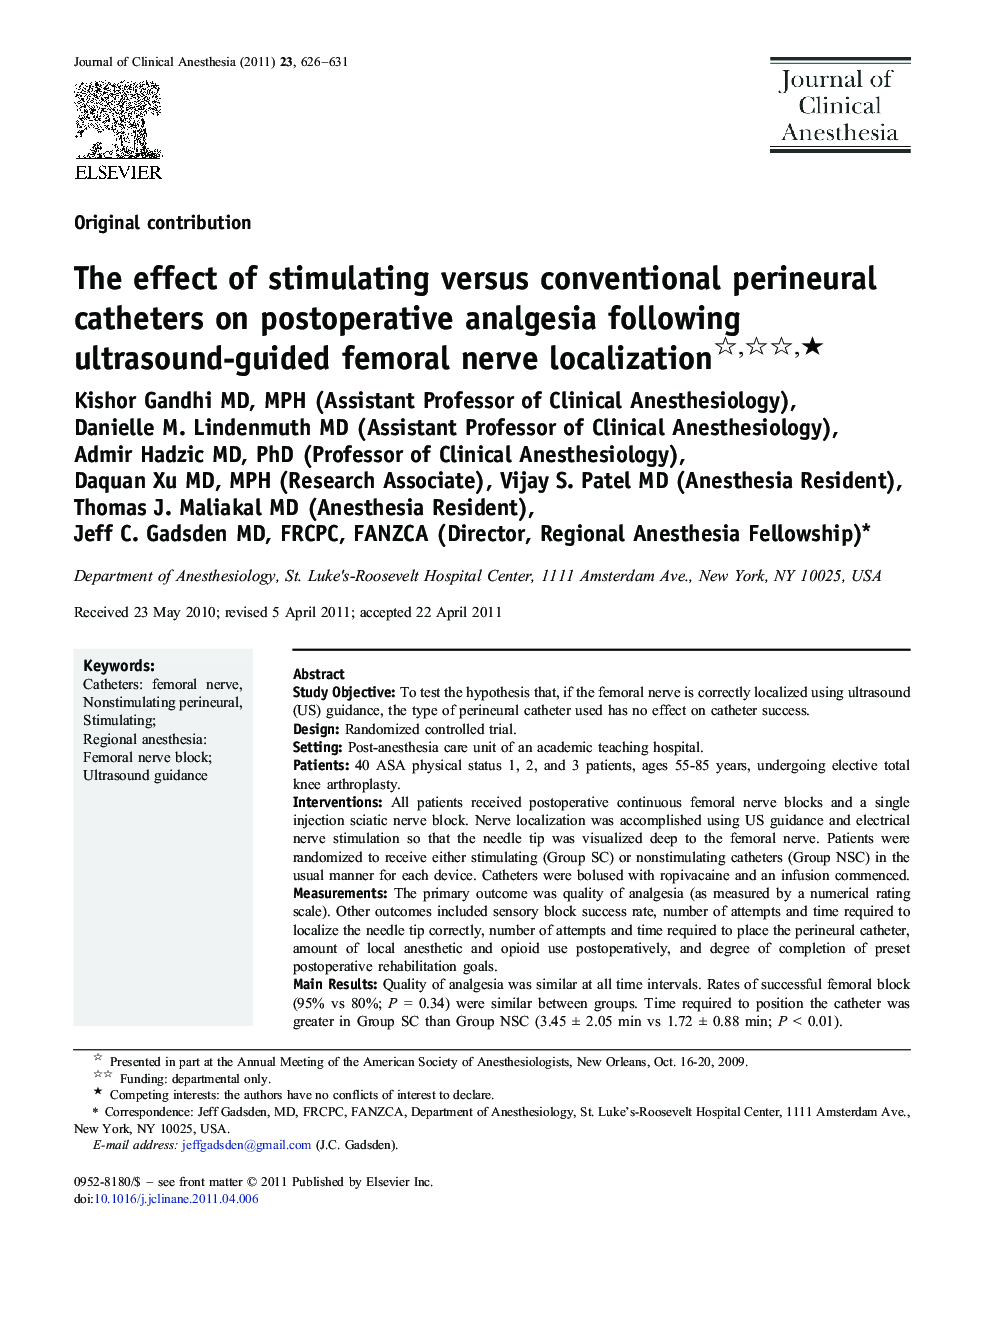 The effect of stimulating versus conventional perineural catheters on postoperative analgesia following ultrasound-guided femoral nerve localization ★